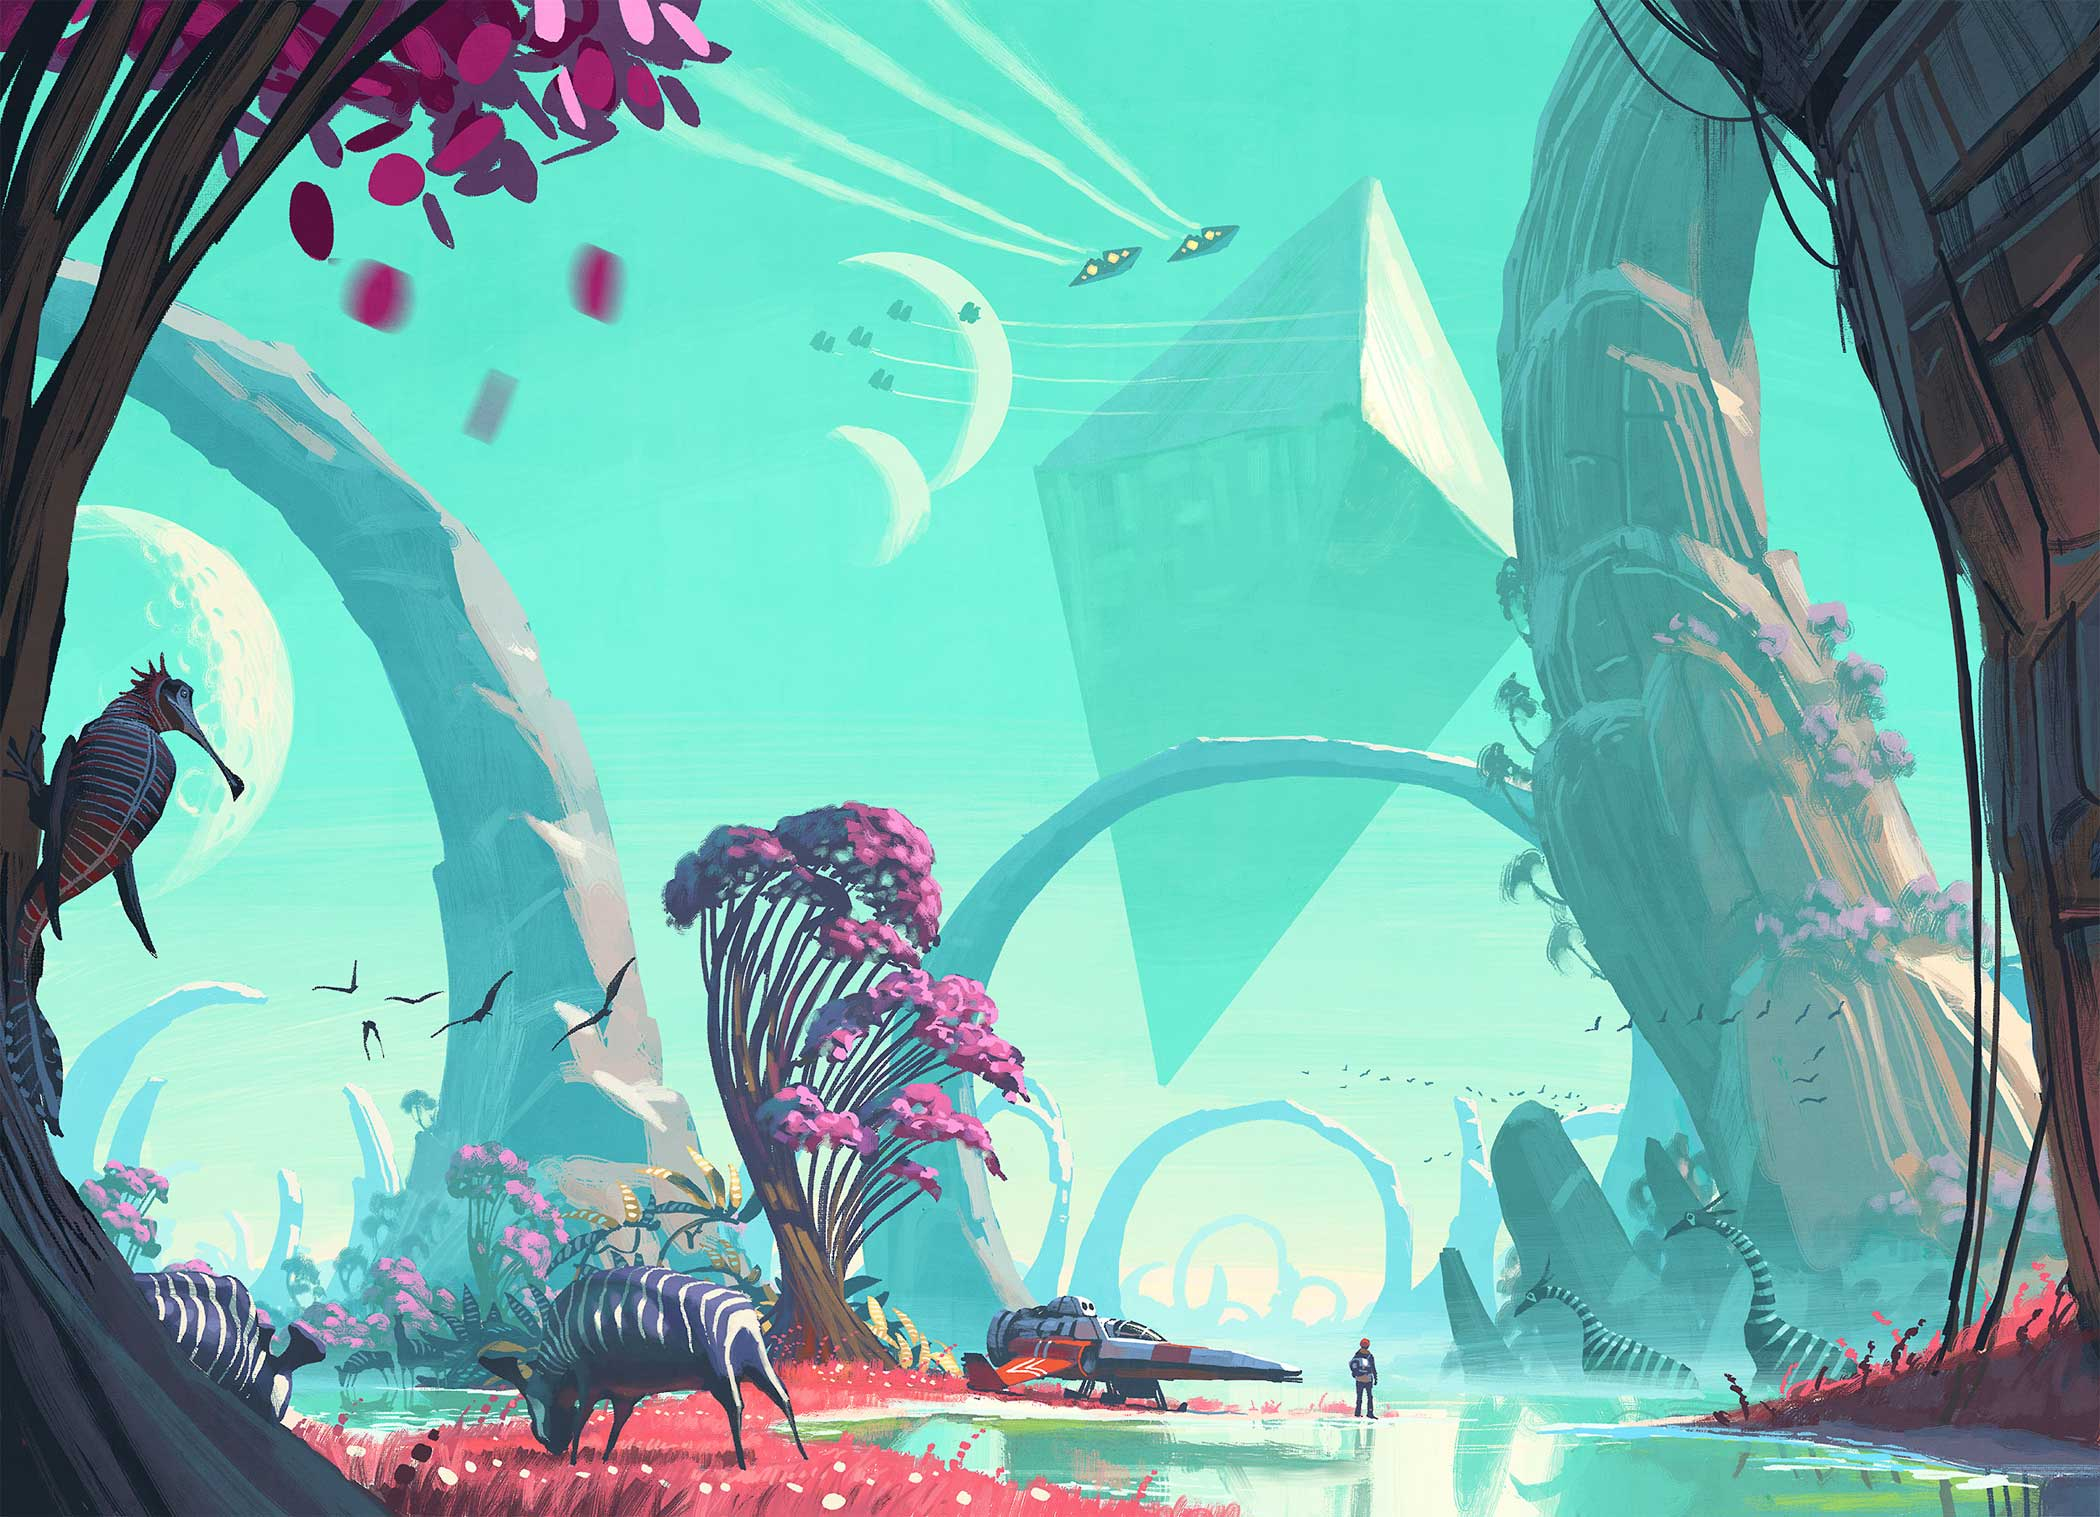 No Man Sky's playgrounds pulse with unearthly lifeforms and stunningly alien vistas